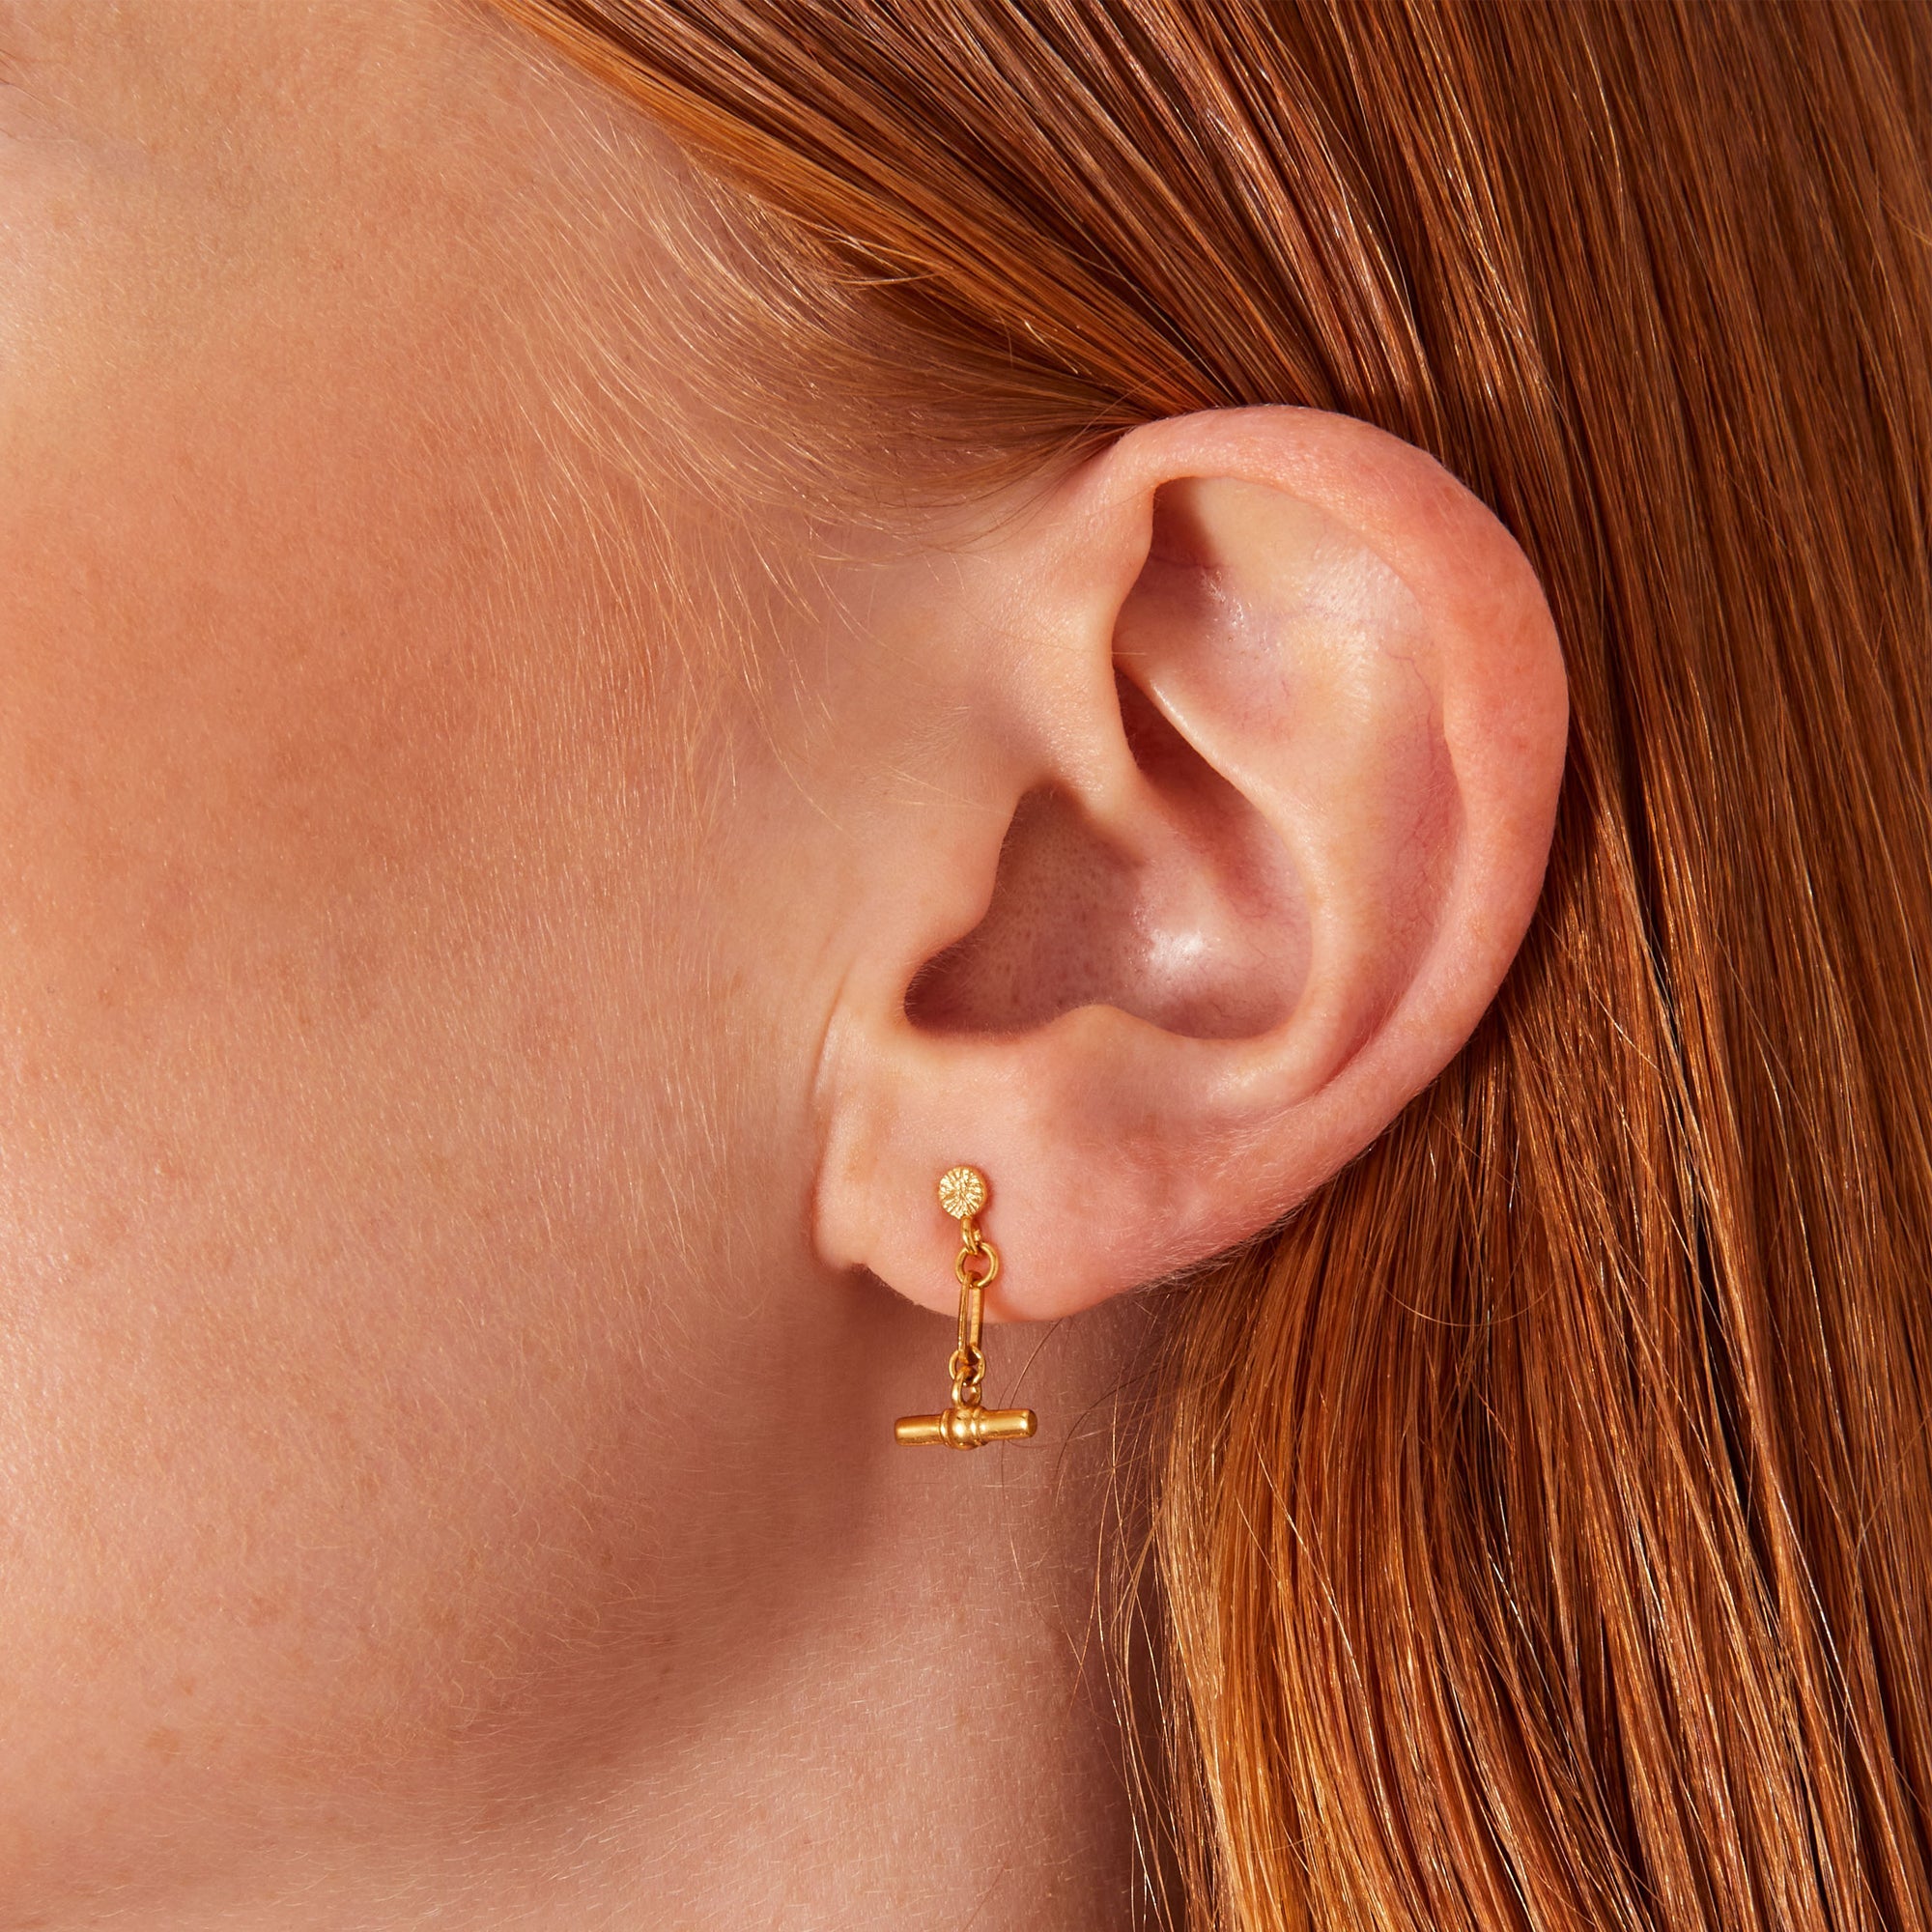 Real Gold Plated Z Modern Heirloom T-Bar Earrings For Women By Accessorize London